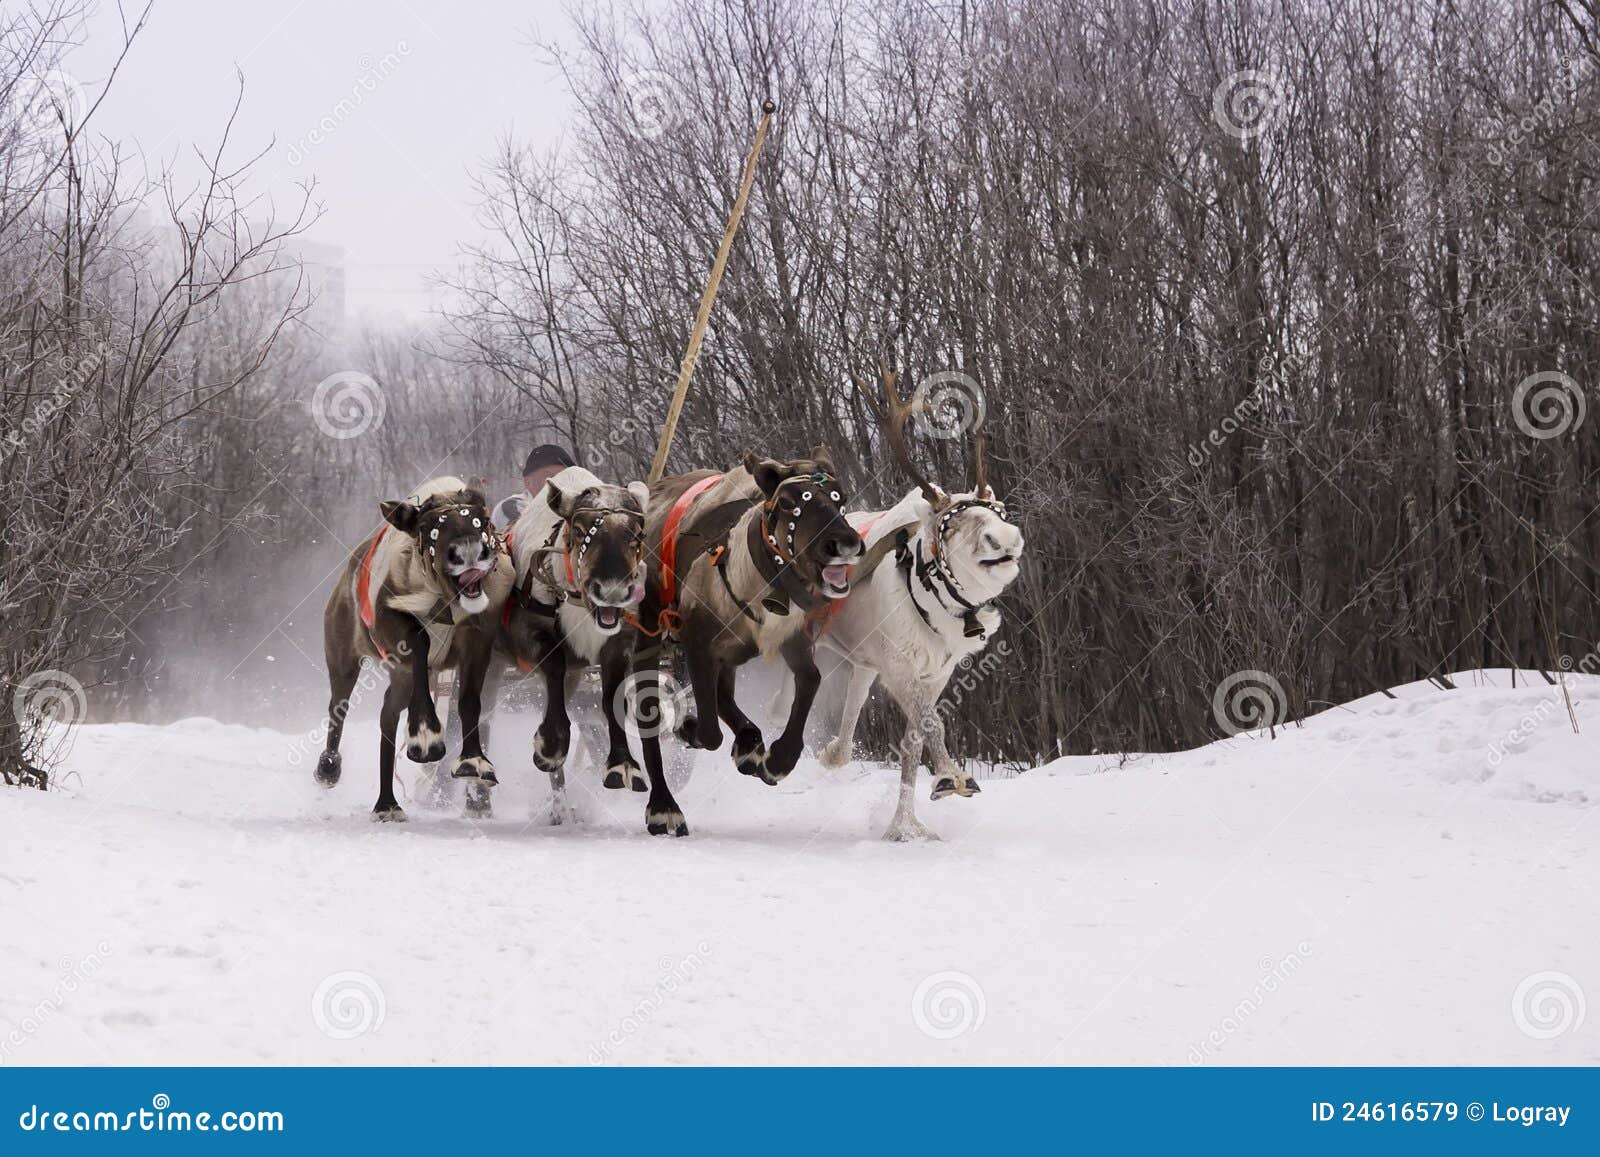 team of rein-deers skims over the snow path.